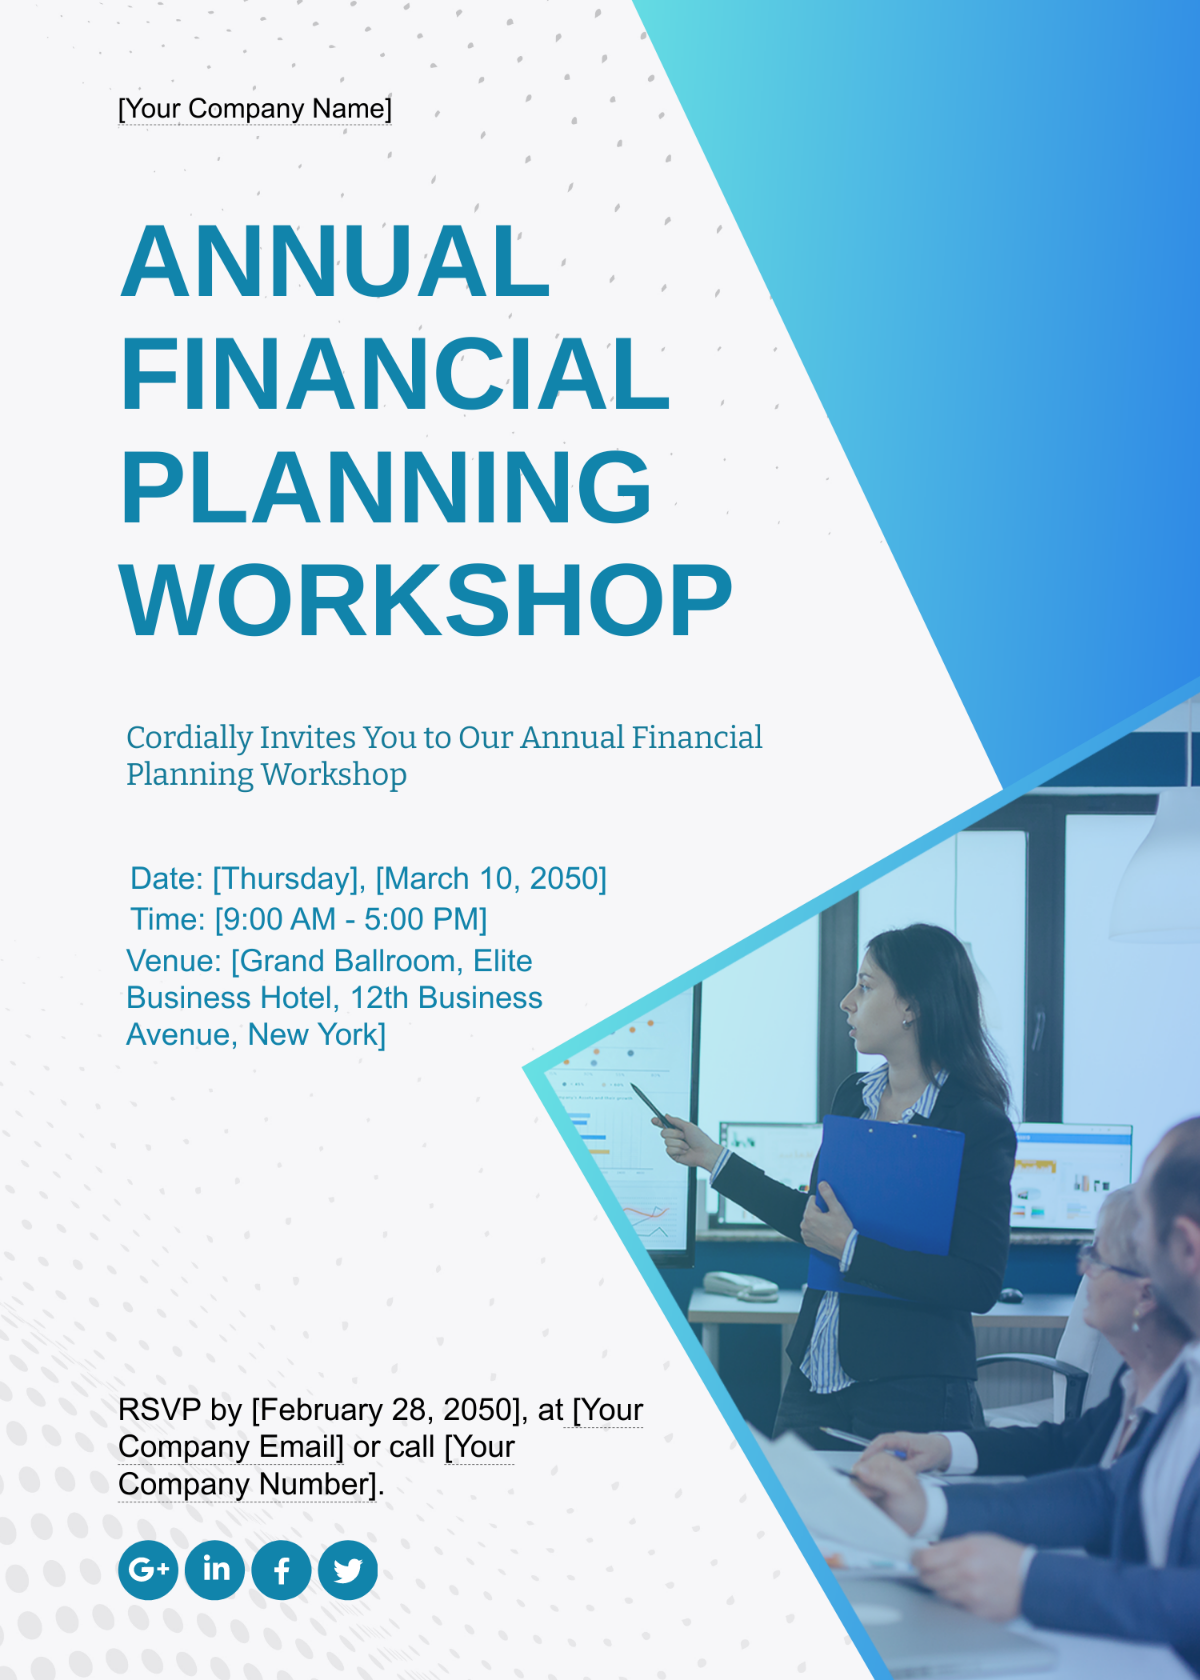 Annual Financial Planning Workshop Invitation Card Template